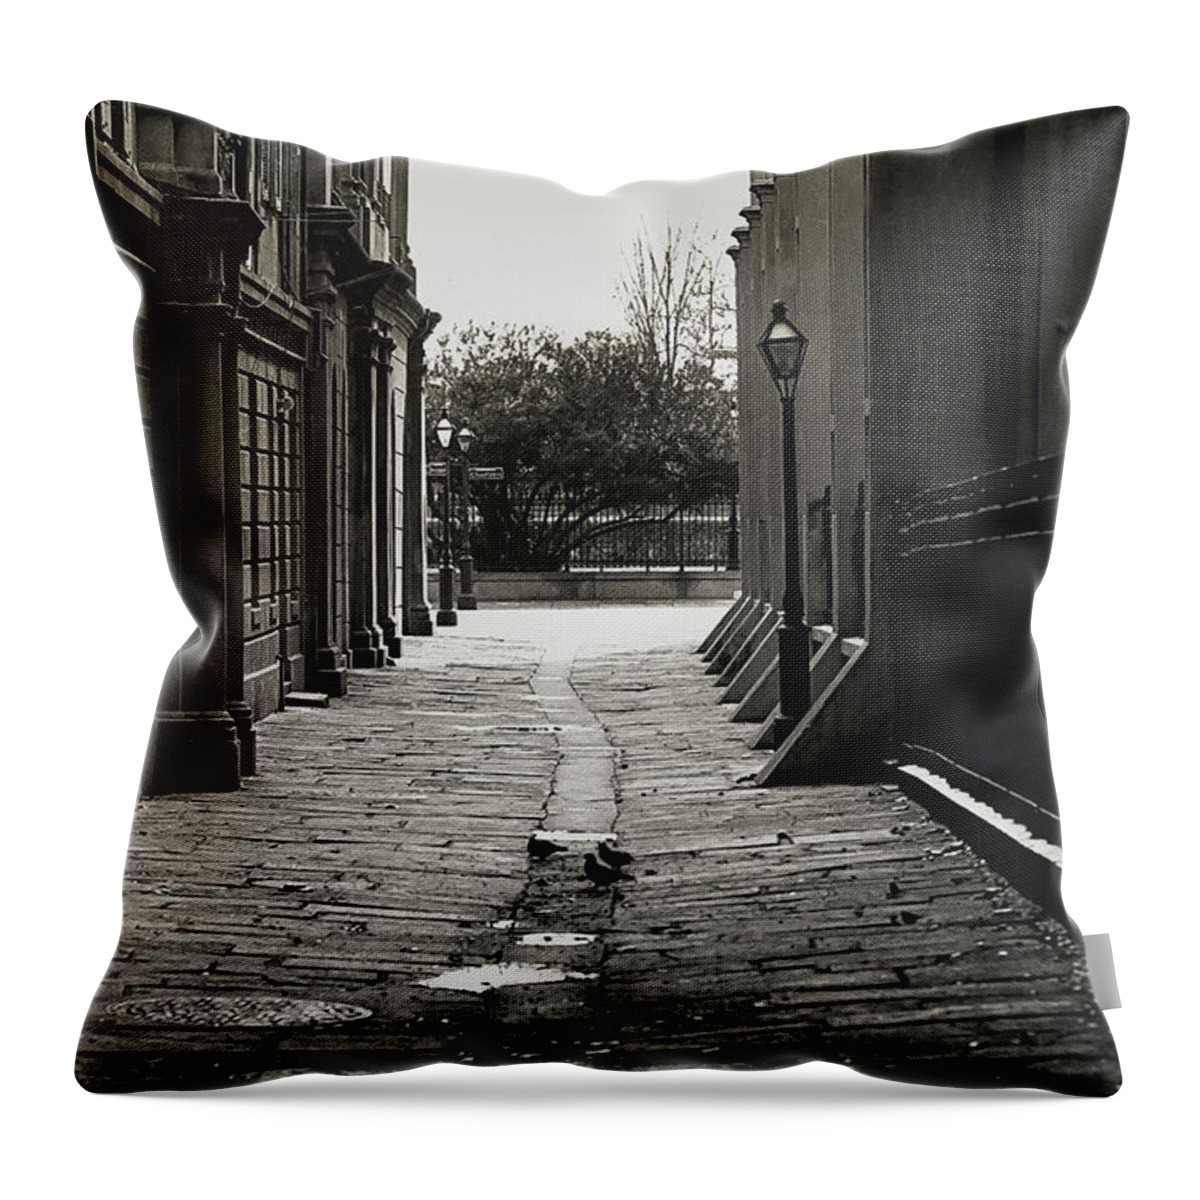 Louisiana Throw Pillow featuring the photograph French Quarter Alley by KG Thienemann